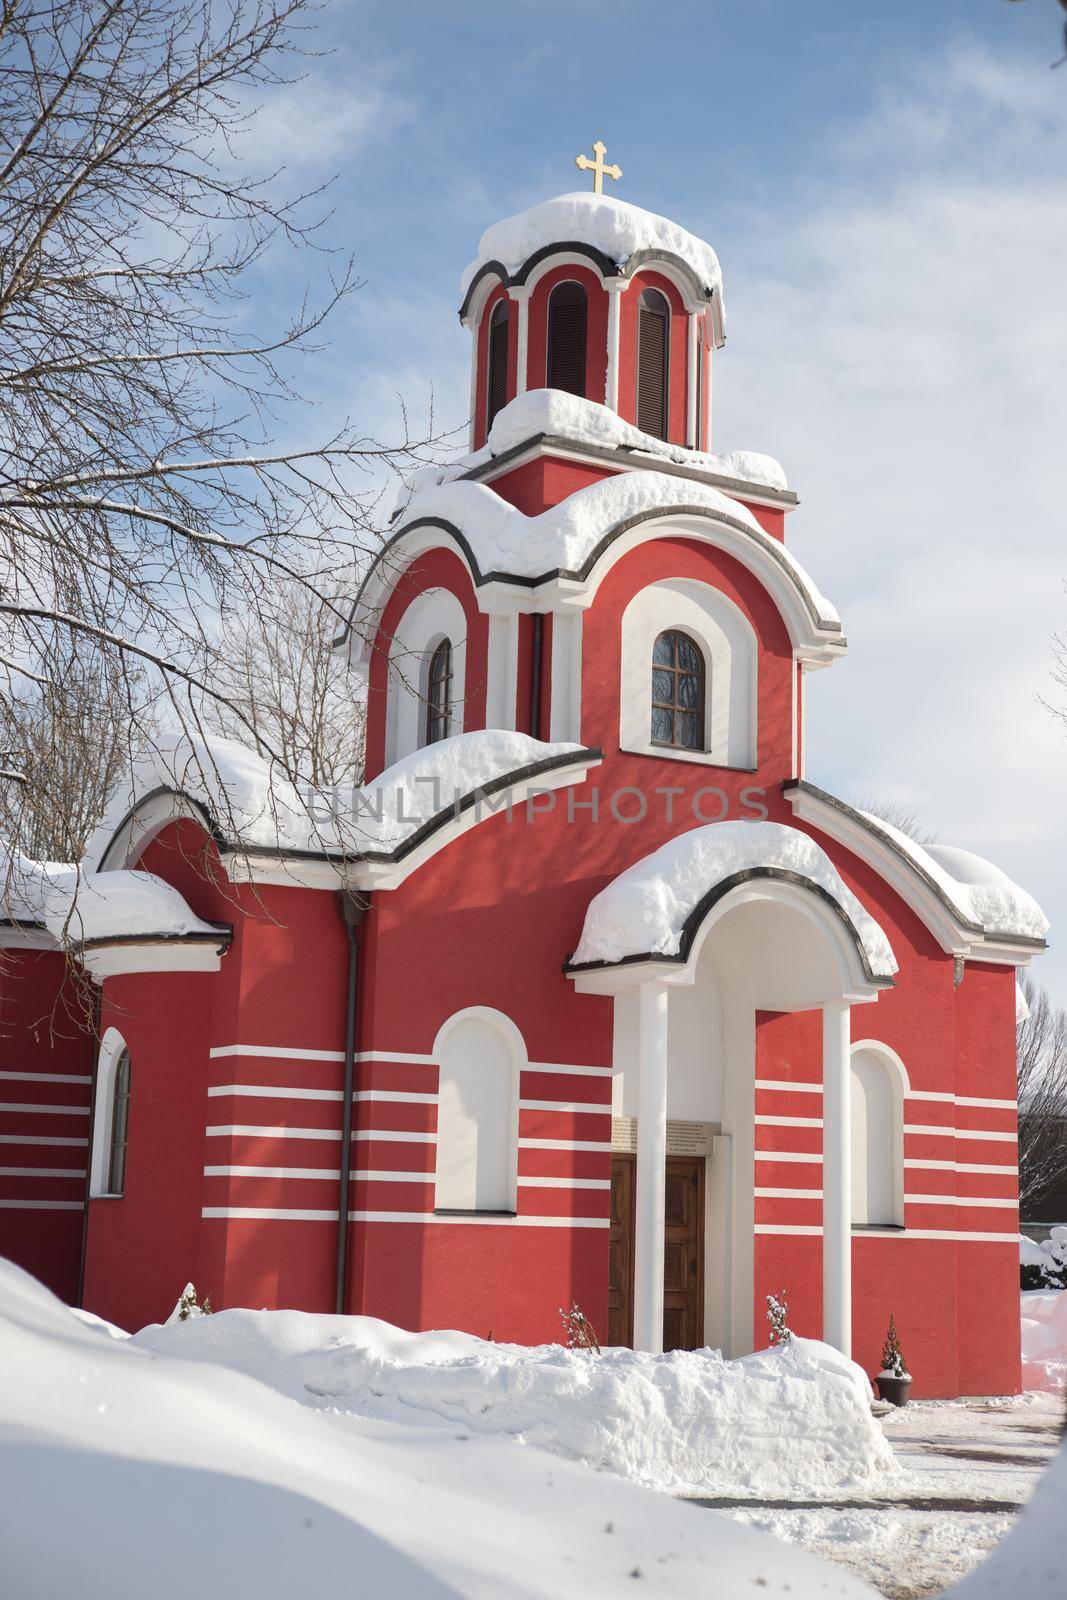 Red Christian church in the winter, snow on the roof by Daxenbichler